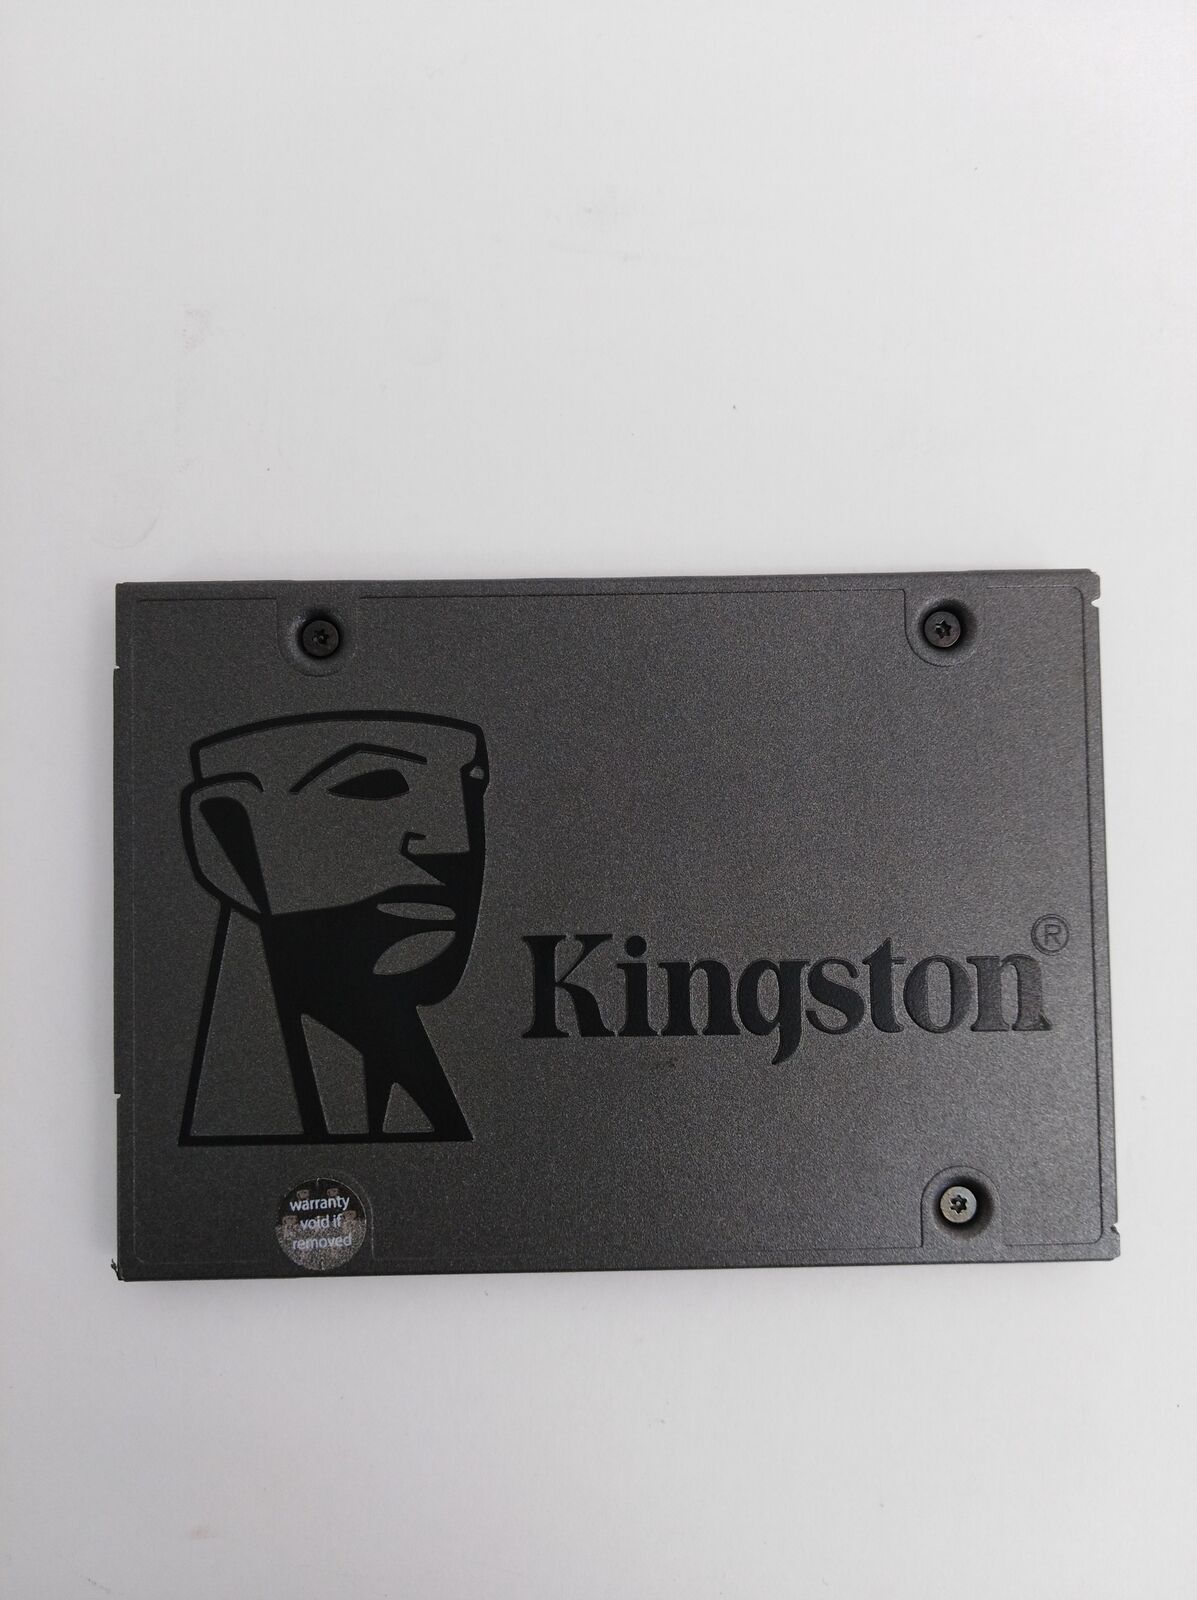 Kingston A400 SA400S37/240G 240 GB SATA III 2.5 in Solid State Drive